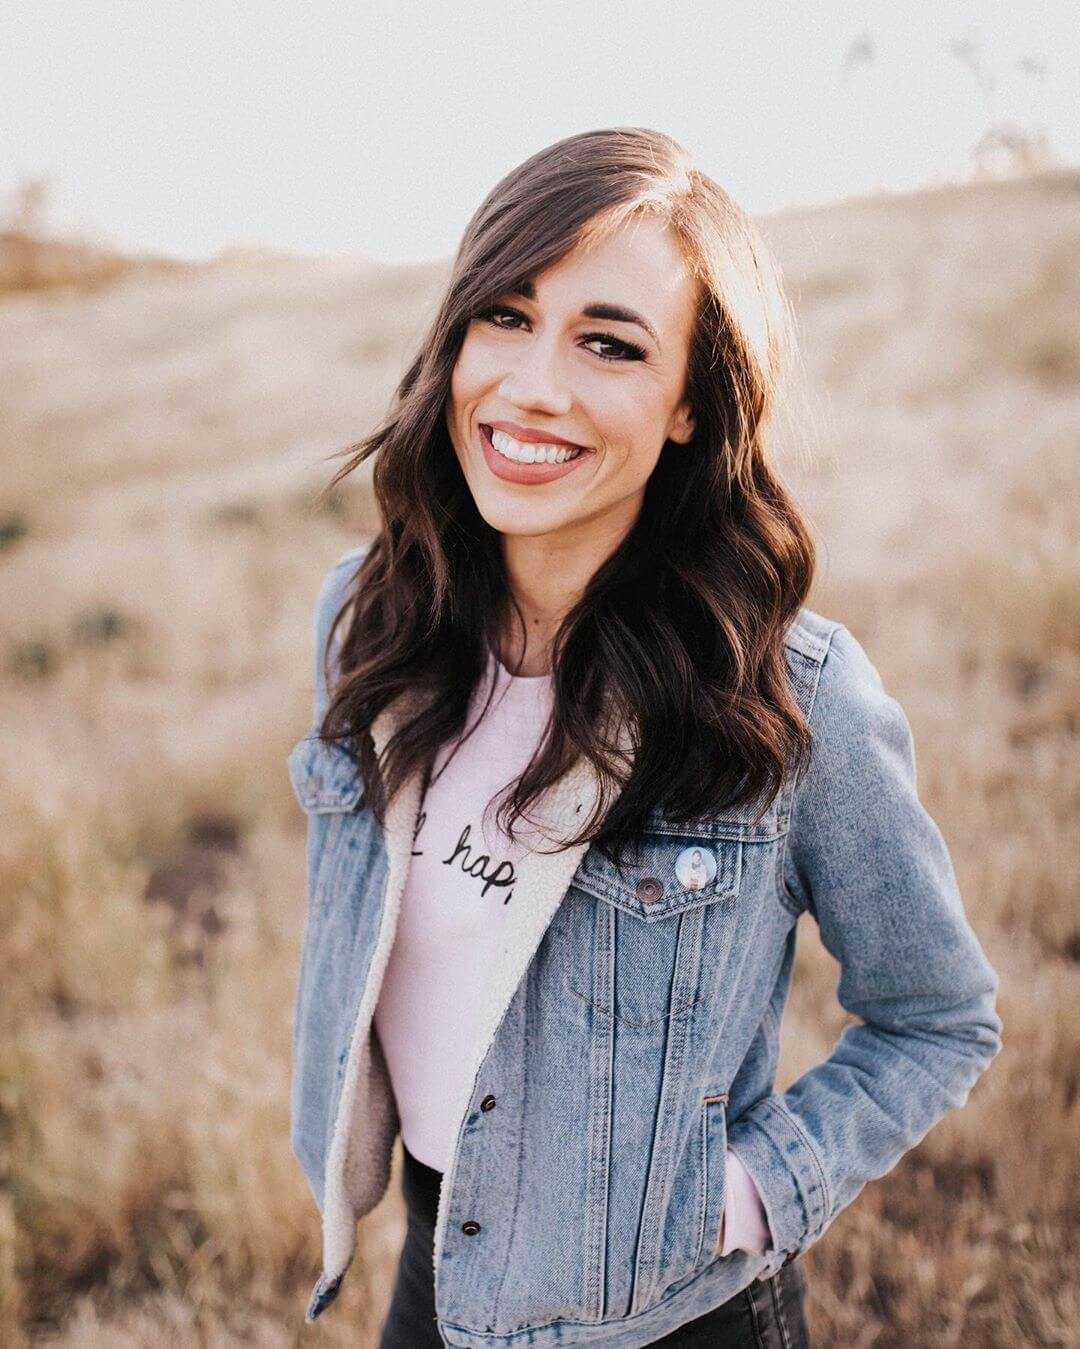 51 Hottest Colleen Ballinger Big Butt Pictures That Will Make You Begin To Look All Starry Eyed At Her 23